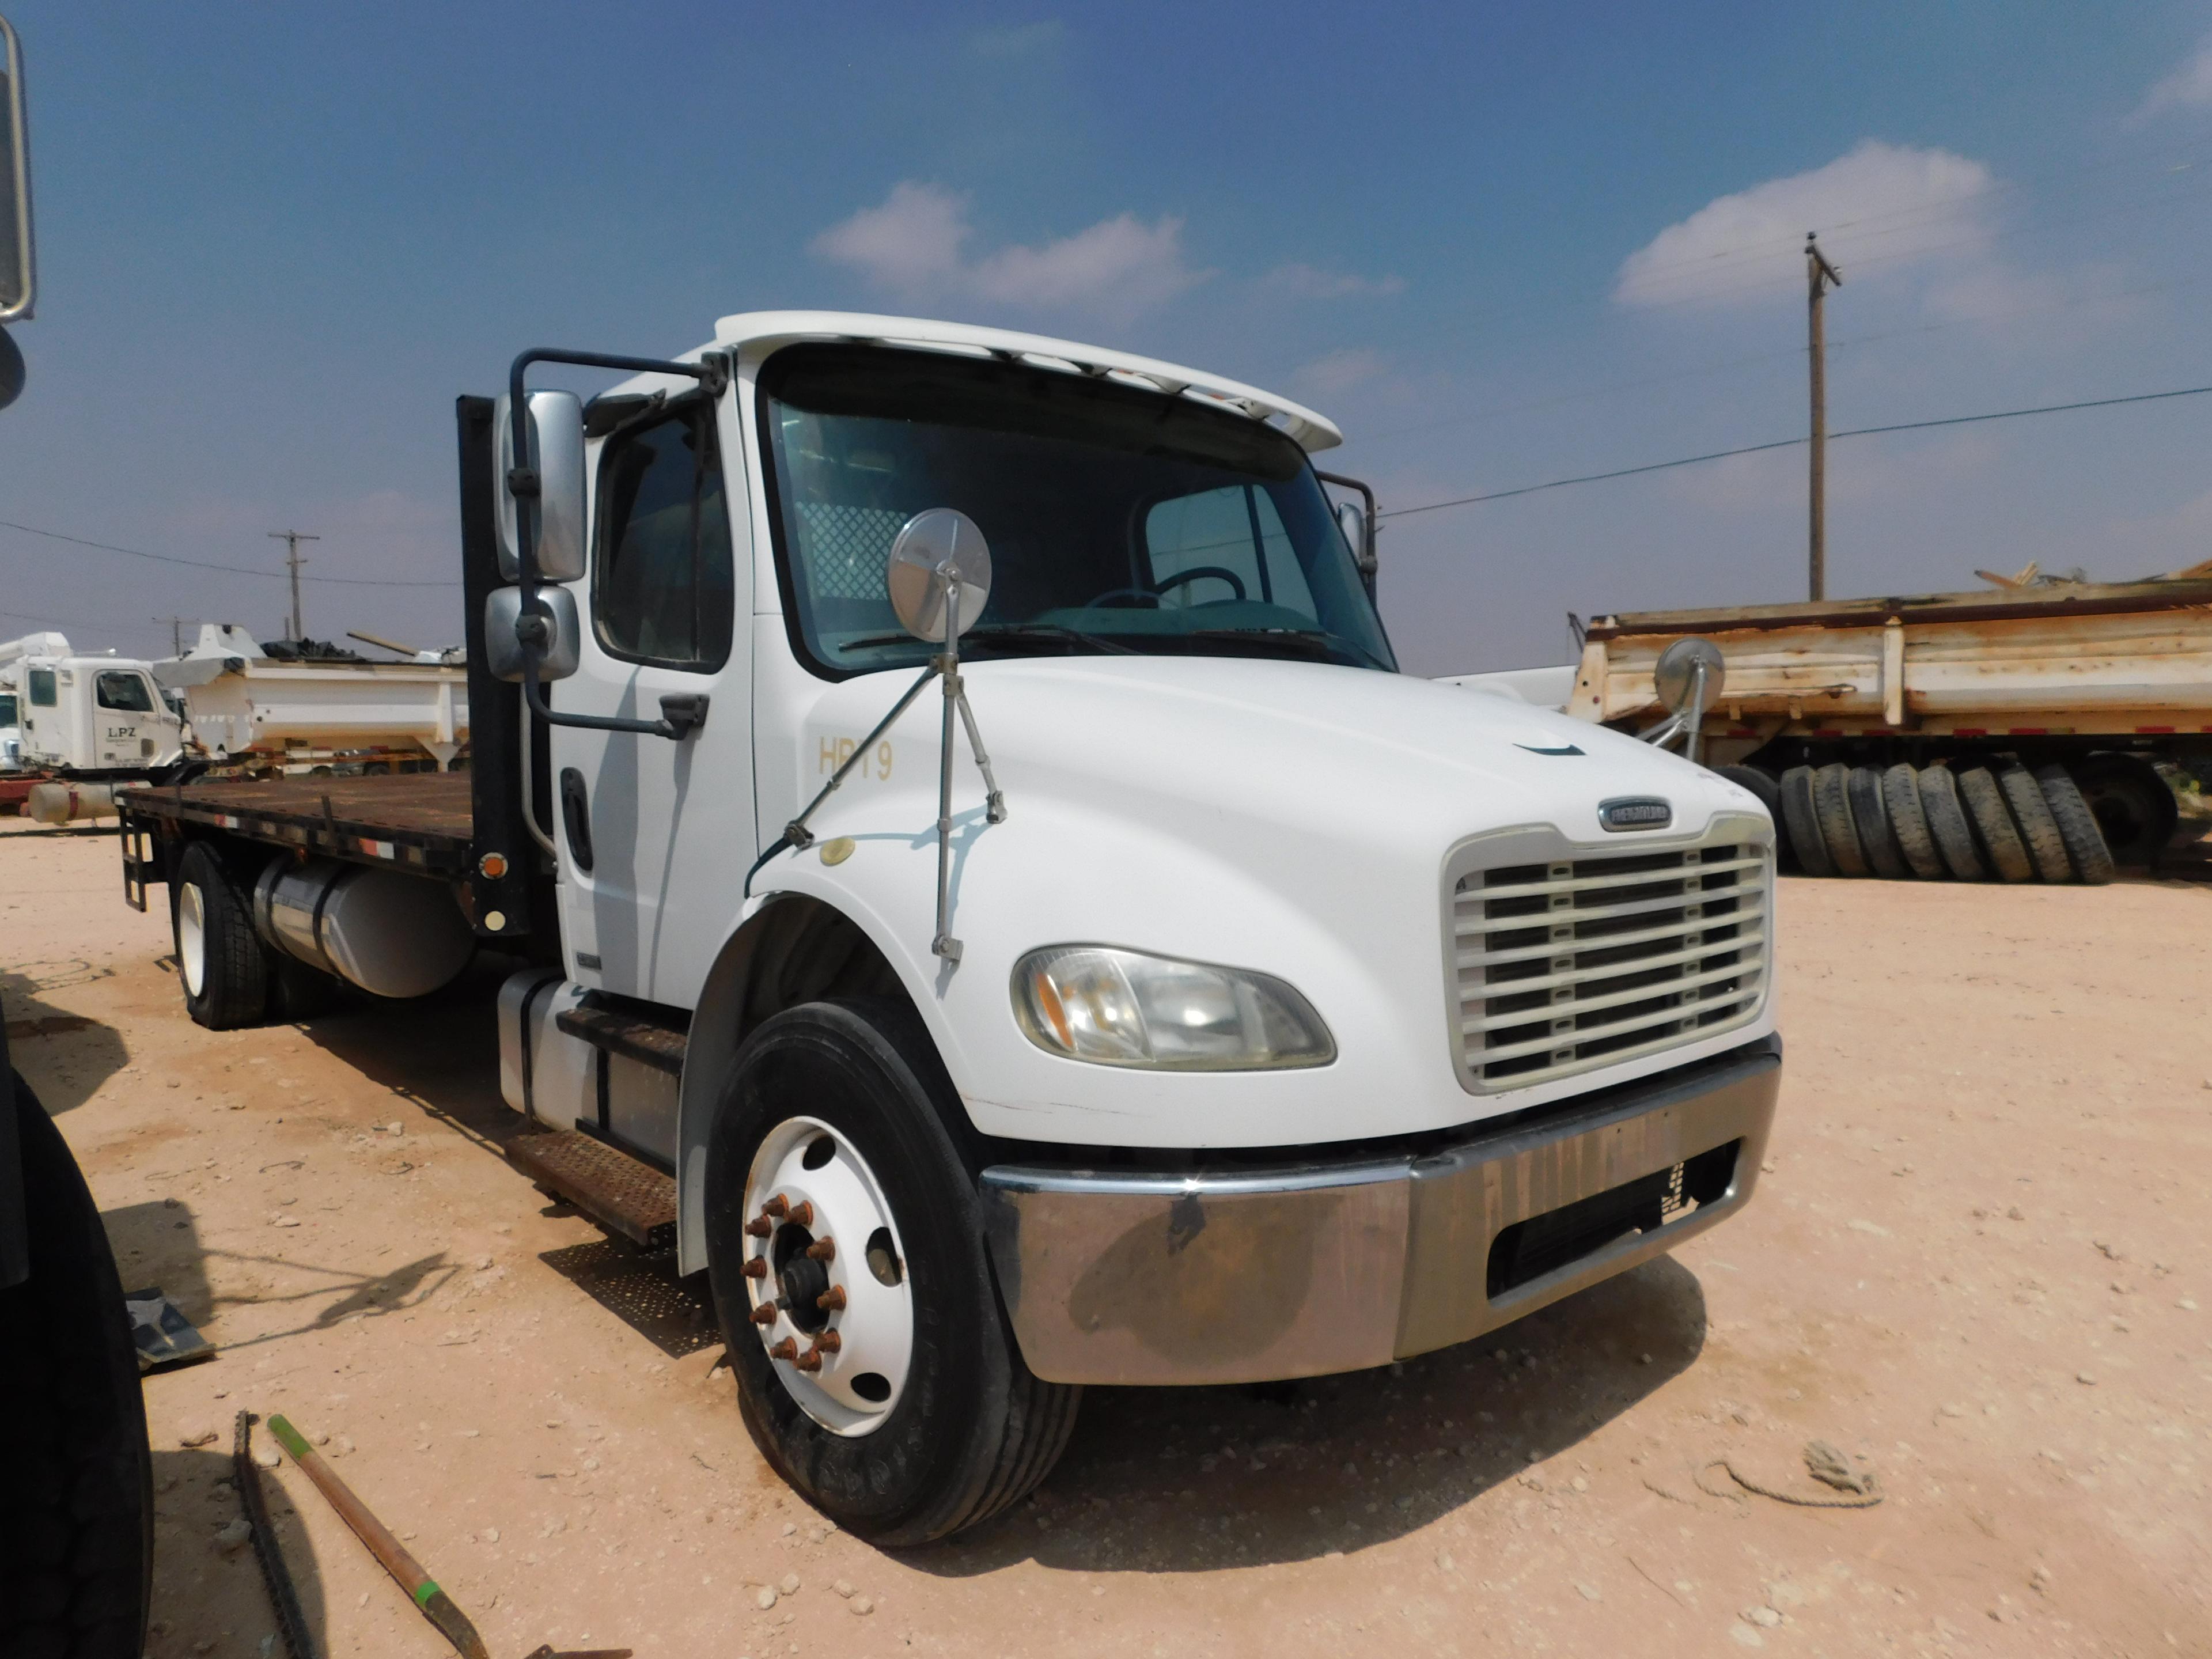 2005 FREIGHTLINER BUSINESS CLASS M2 S/A FLATBED TRUCK VIN:1FYACXDC55DY16478 P/B: